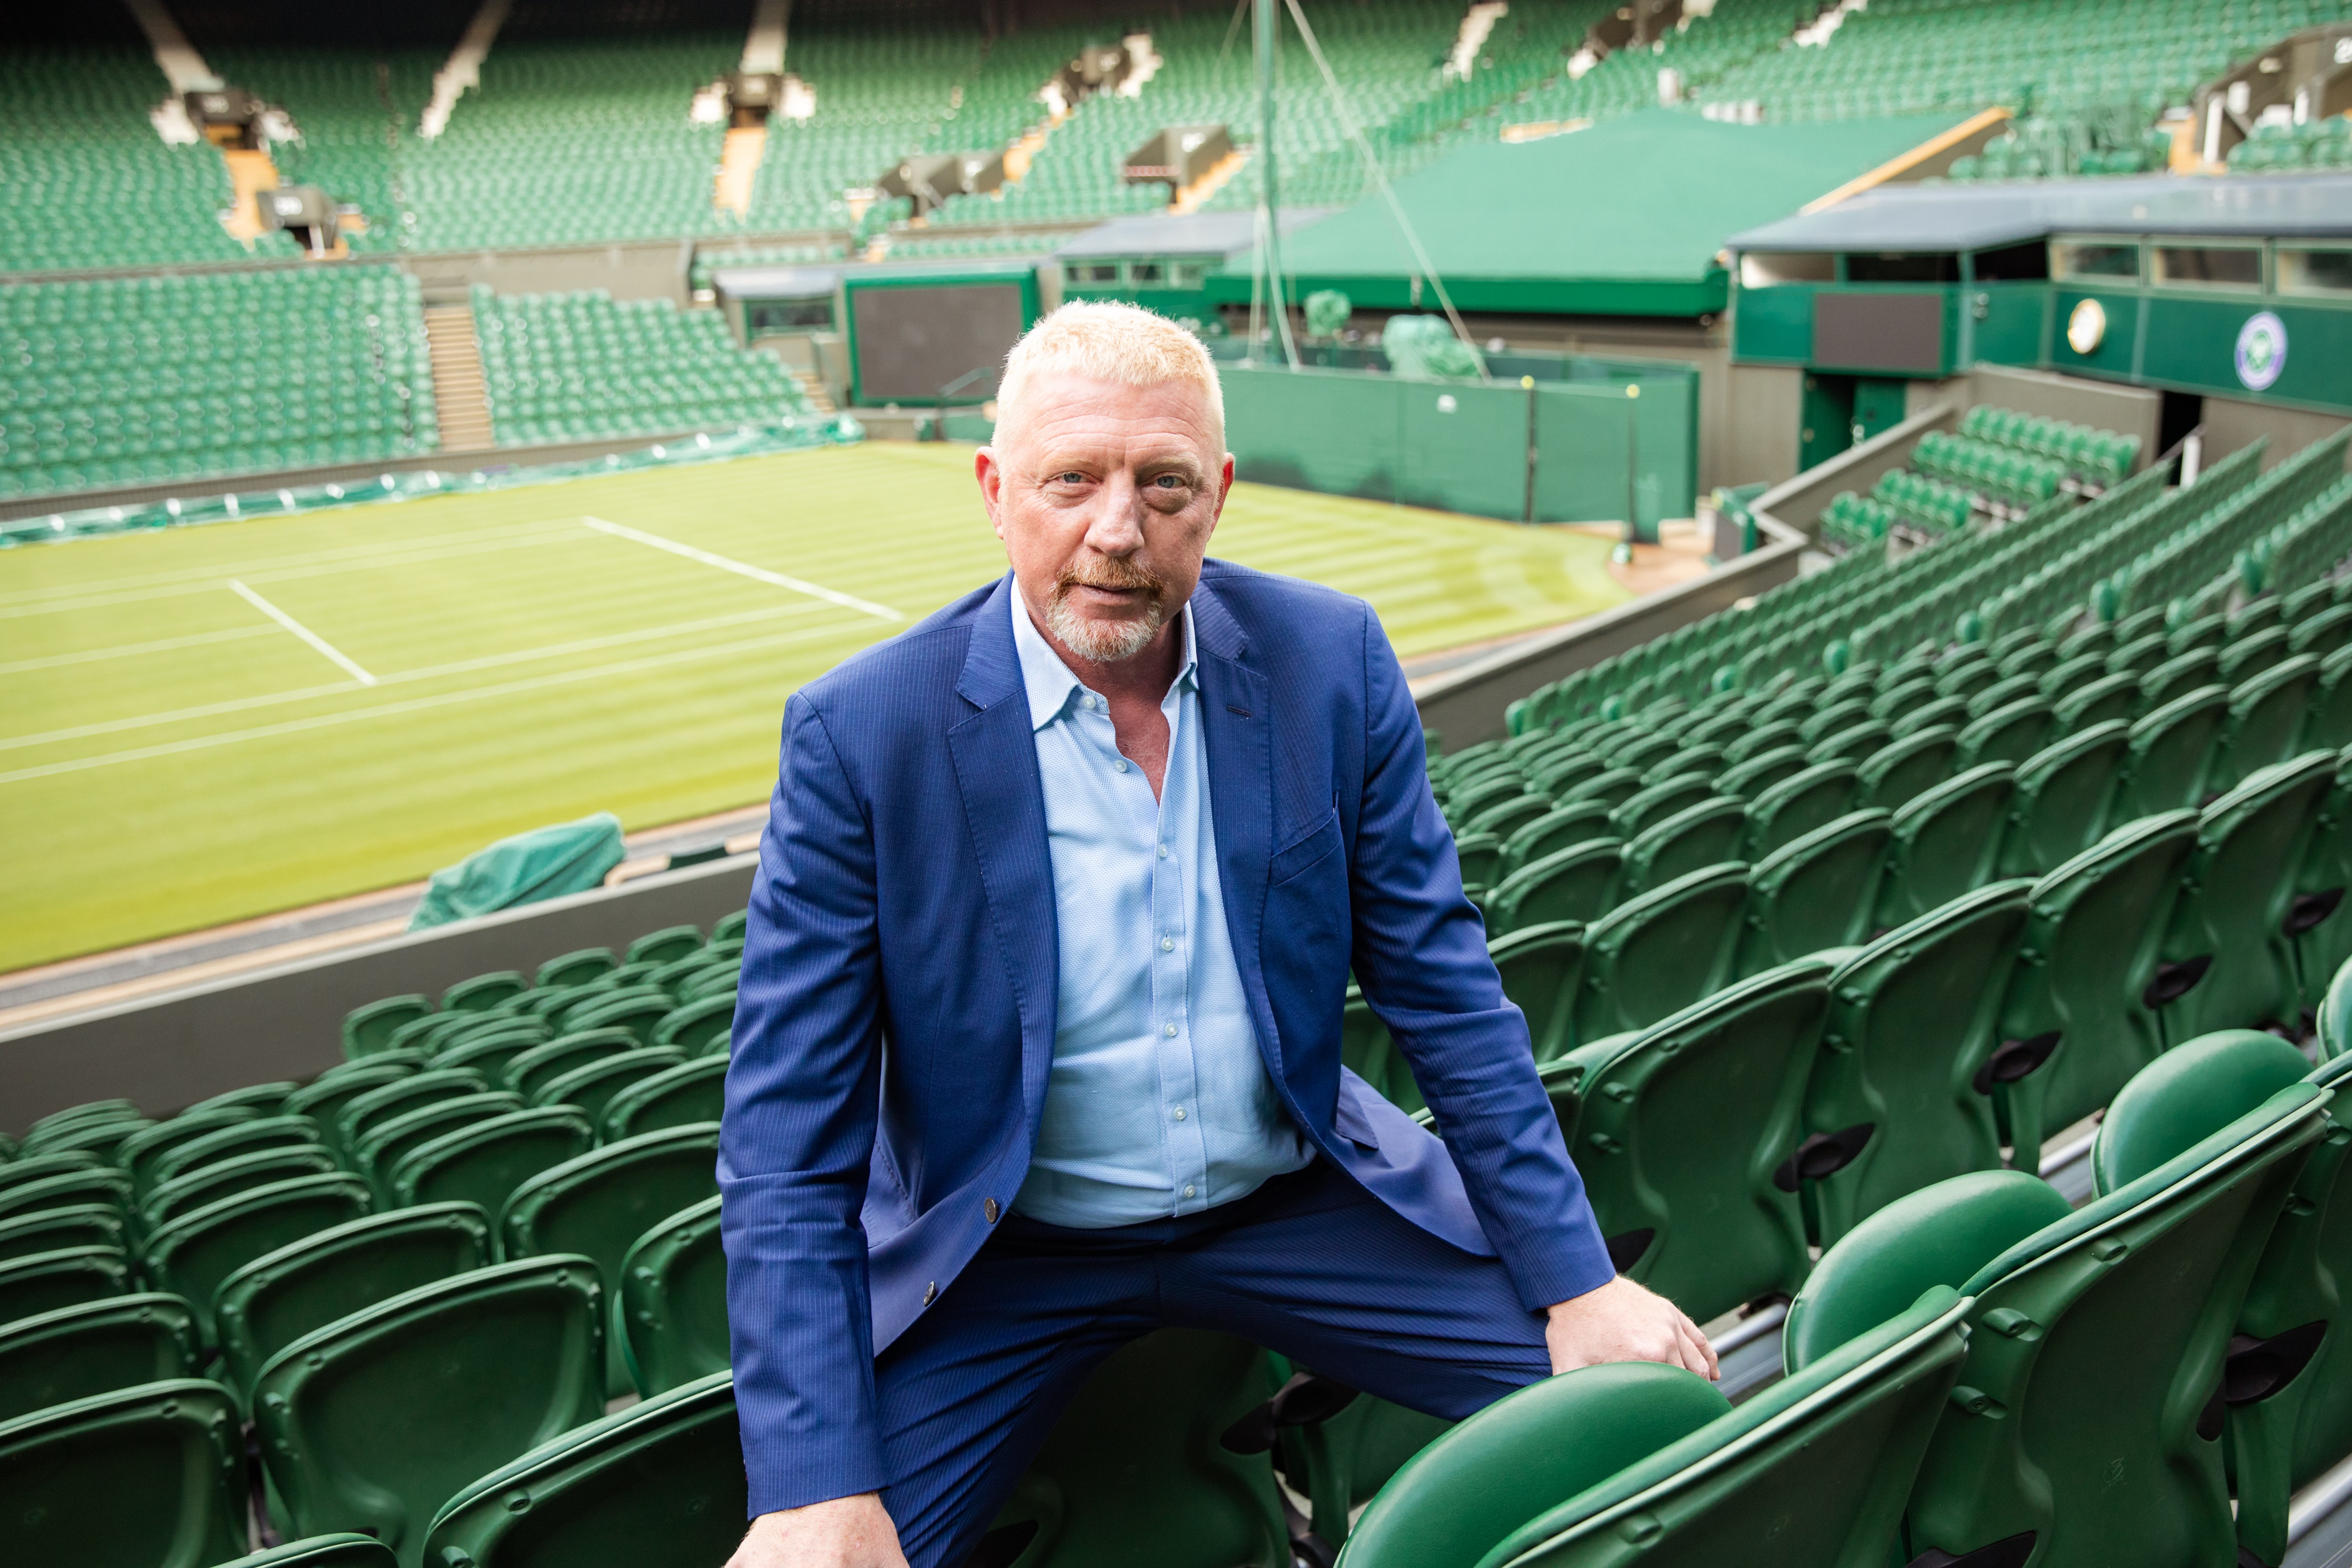 Becker ‘working with authorities’ to be back at Wimbledon in 2025